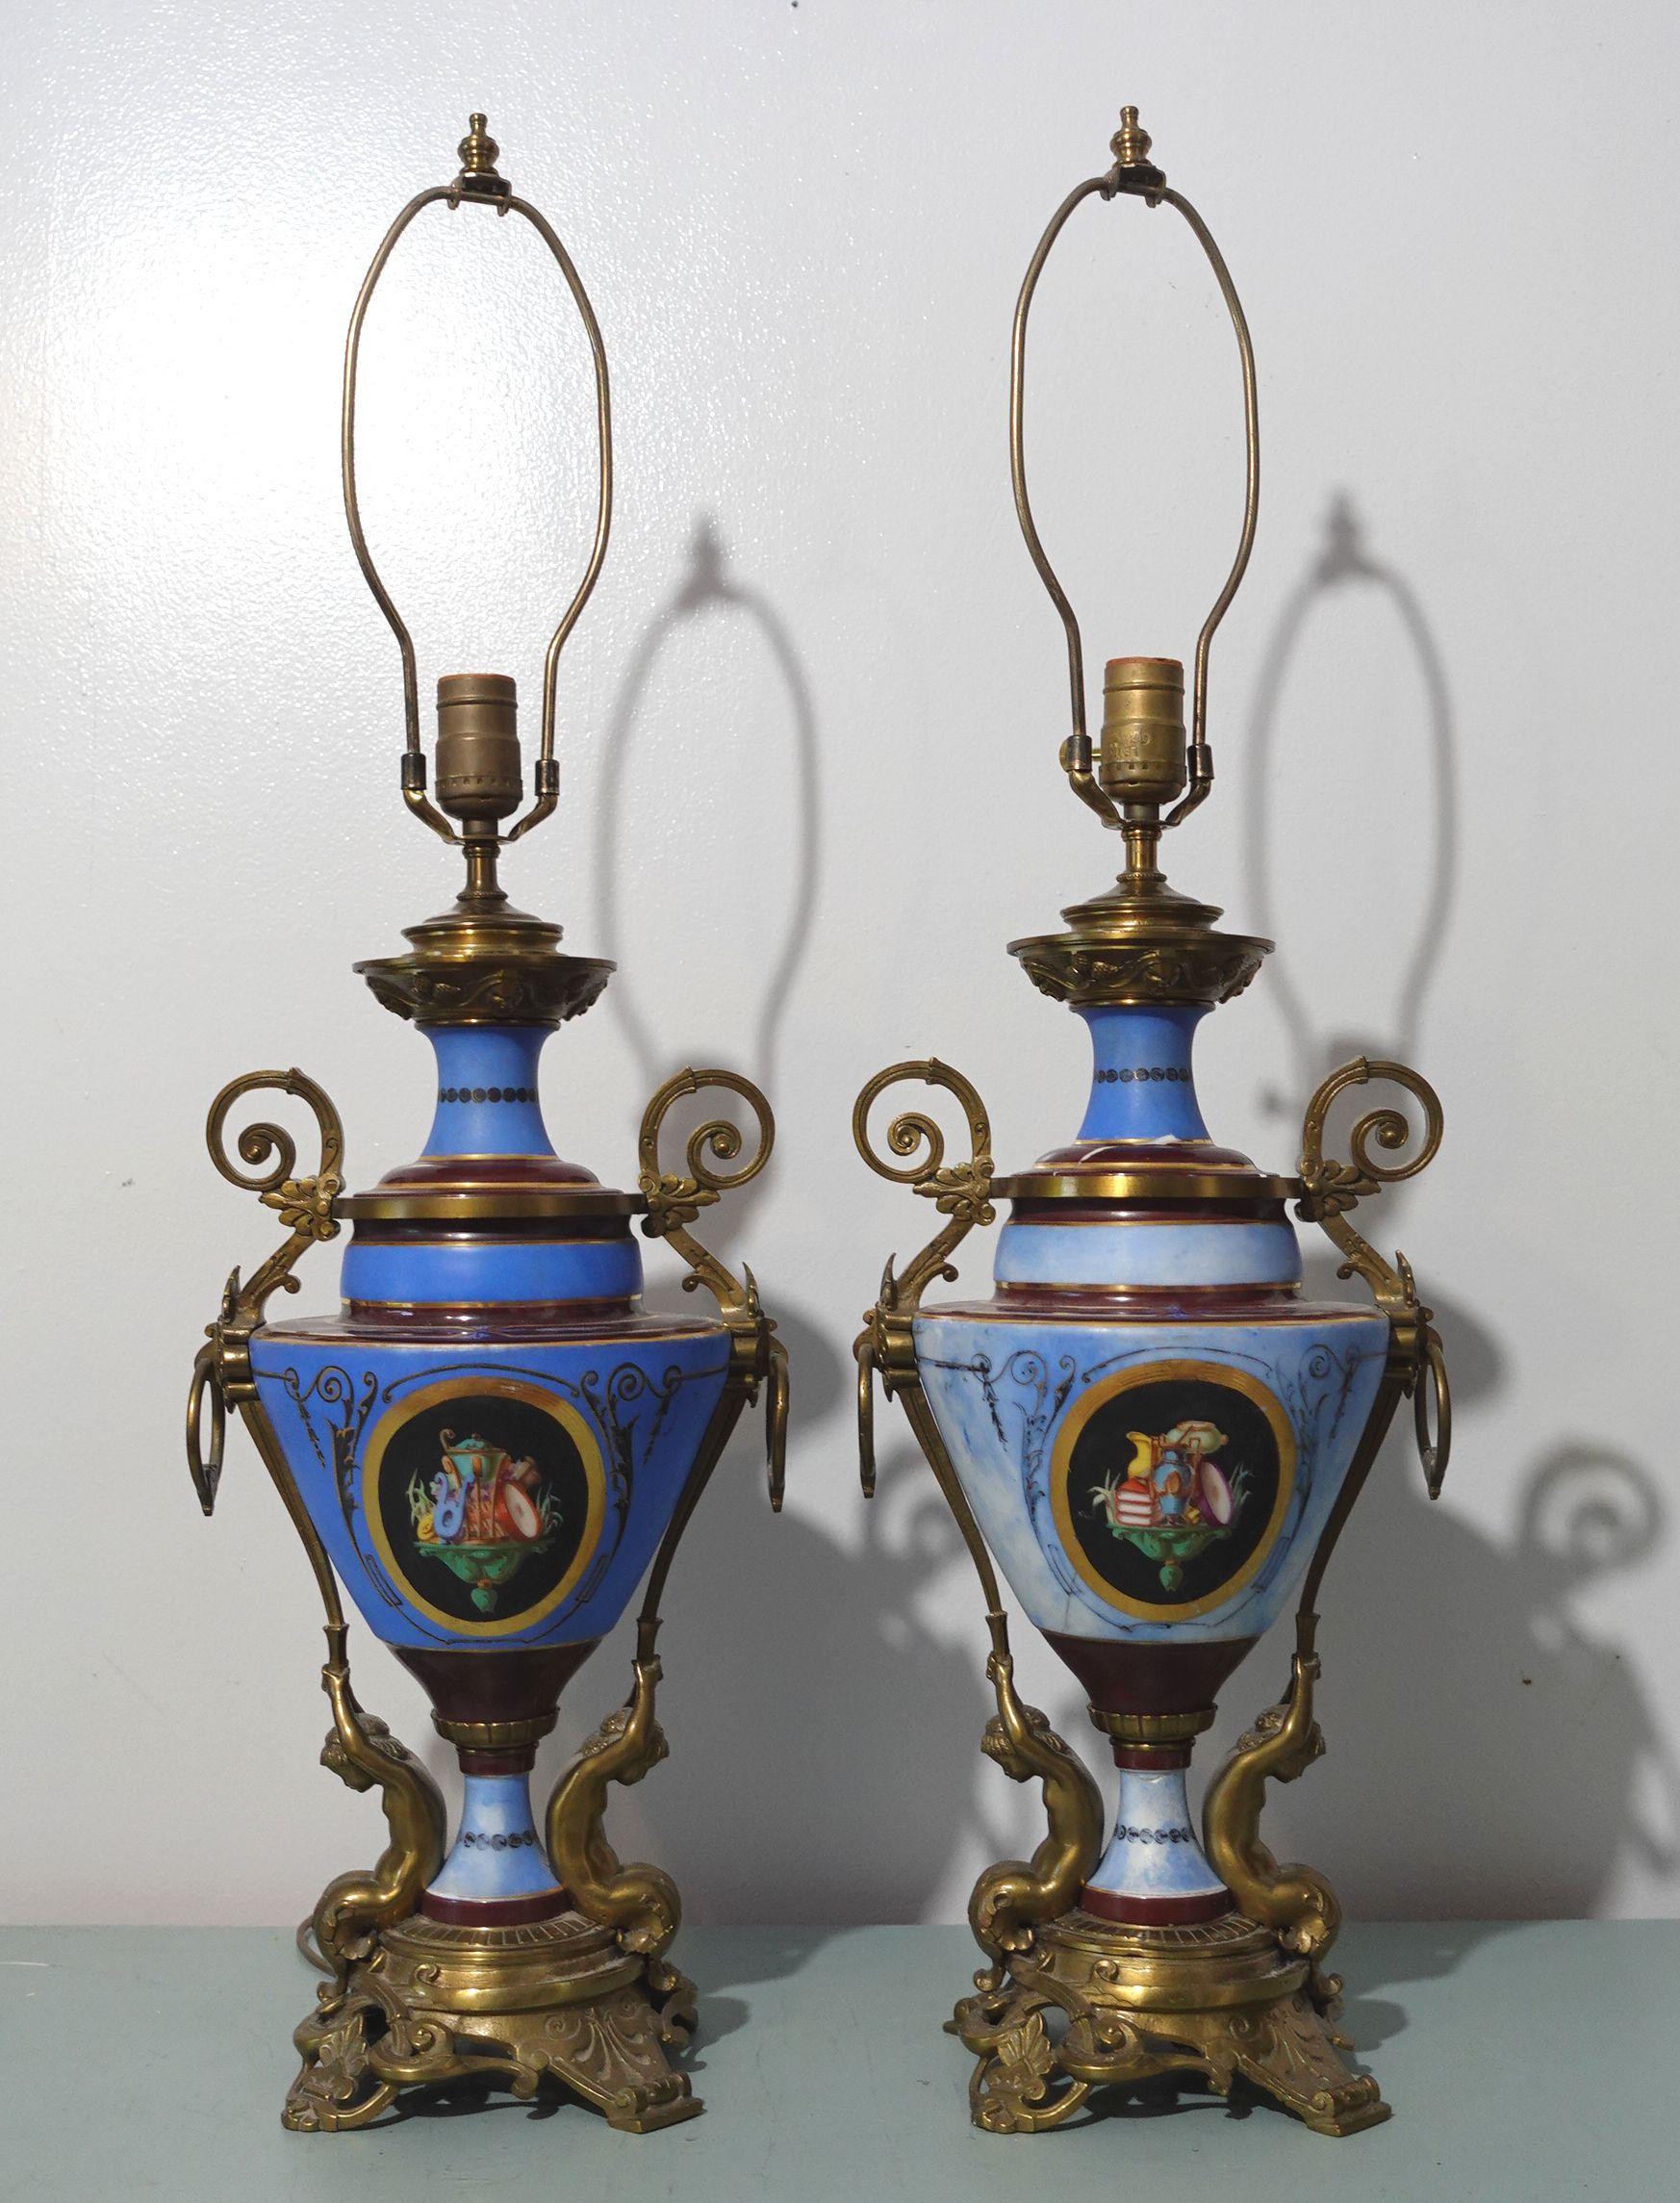 Pair of neoclassical style porcelain lamps, with a blue mat background. Brown and Blue piedouche bases and the inner edge of the neck. On the body, the decor of the central medallion on two sides represents a polychrome character antique style.